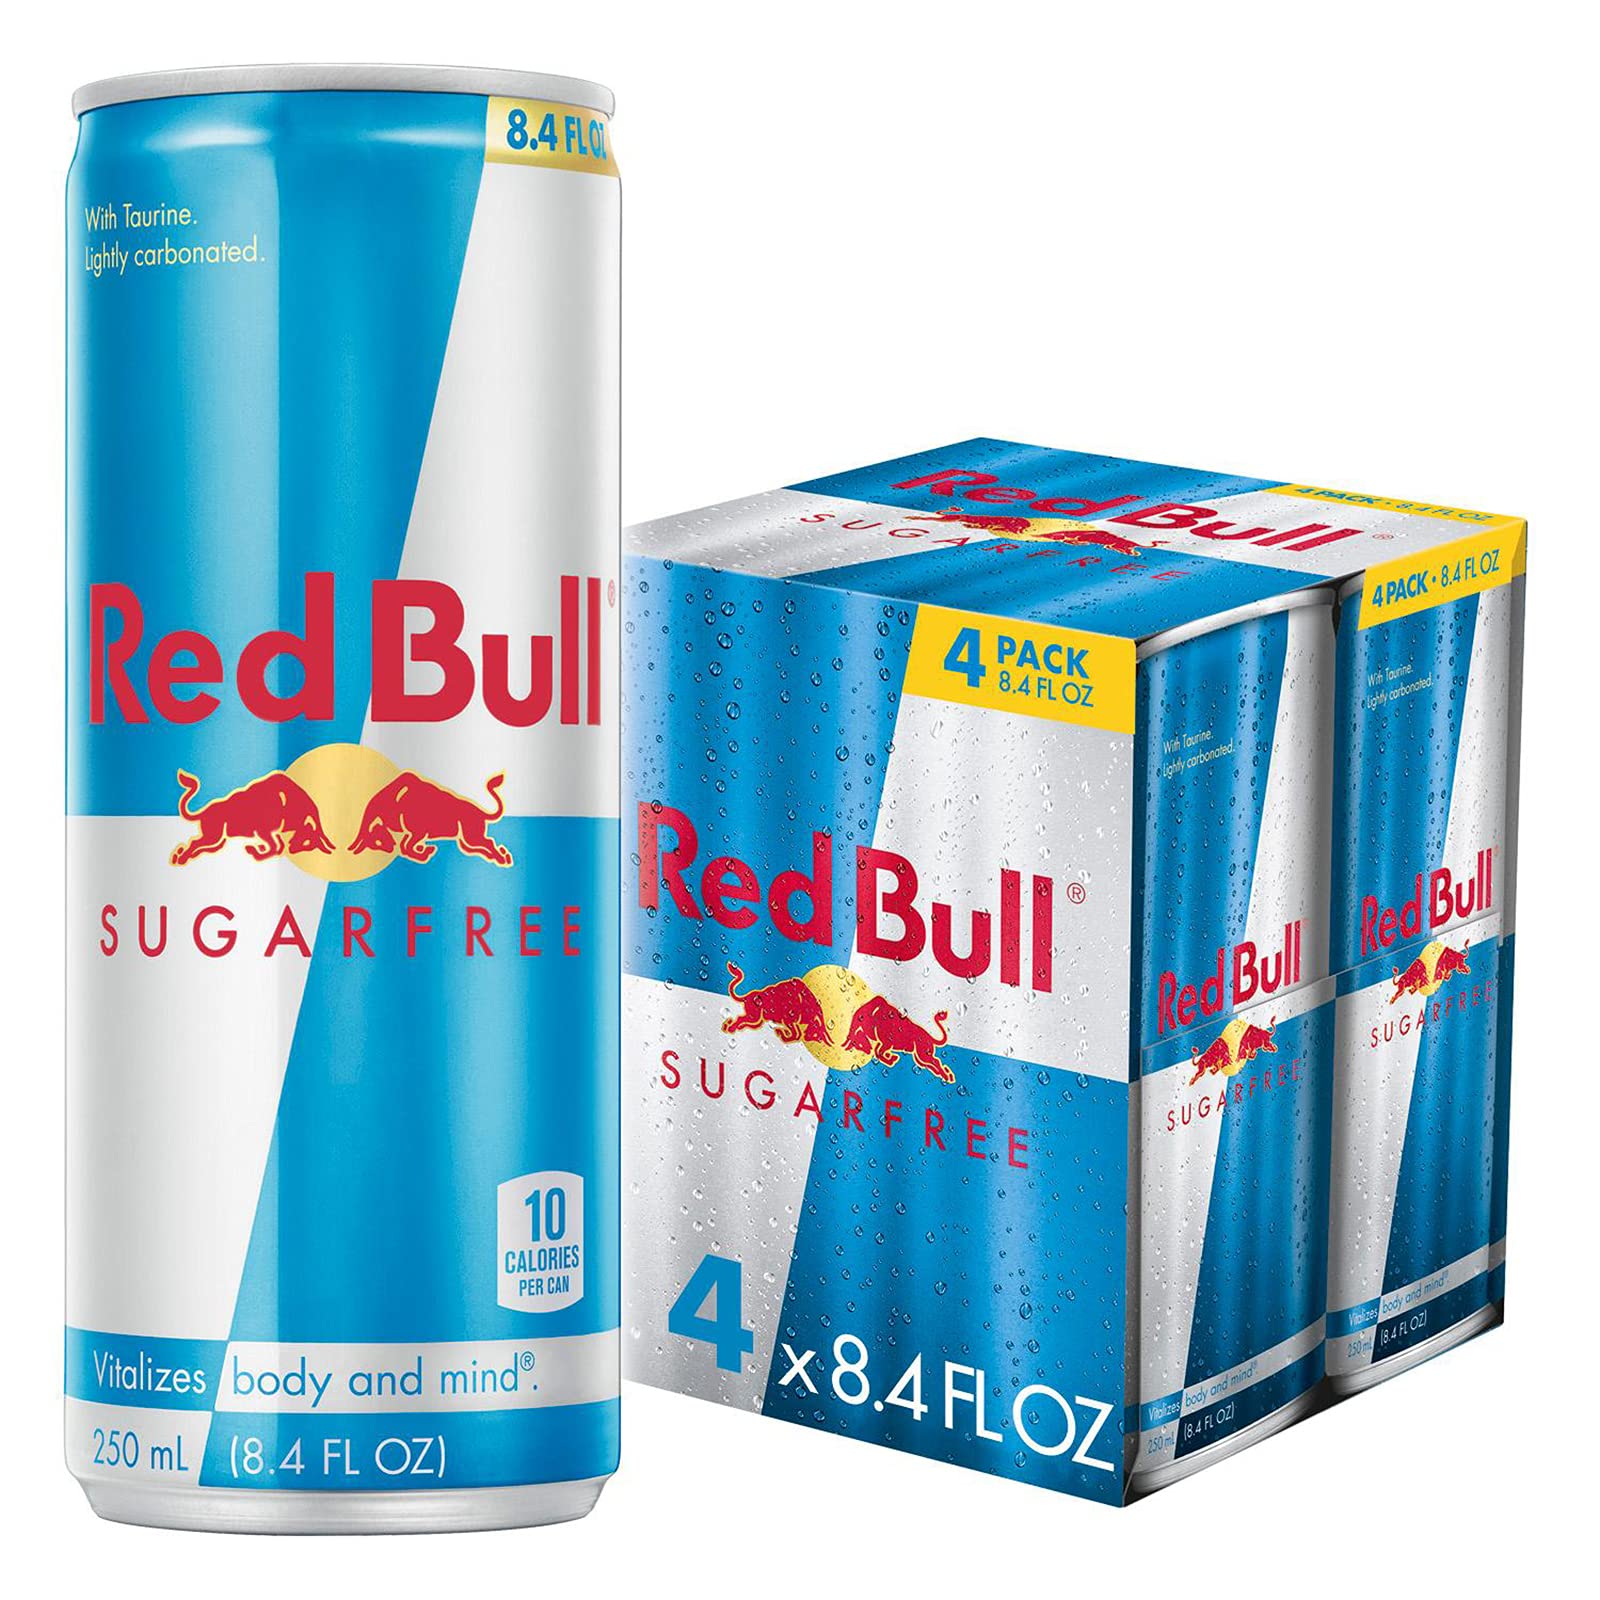 [S&S] $3.69: Red Bull Energy Drink, Sugar Free, 8.4 Fl Oz (4 Pack) at Amazon